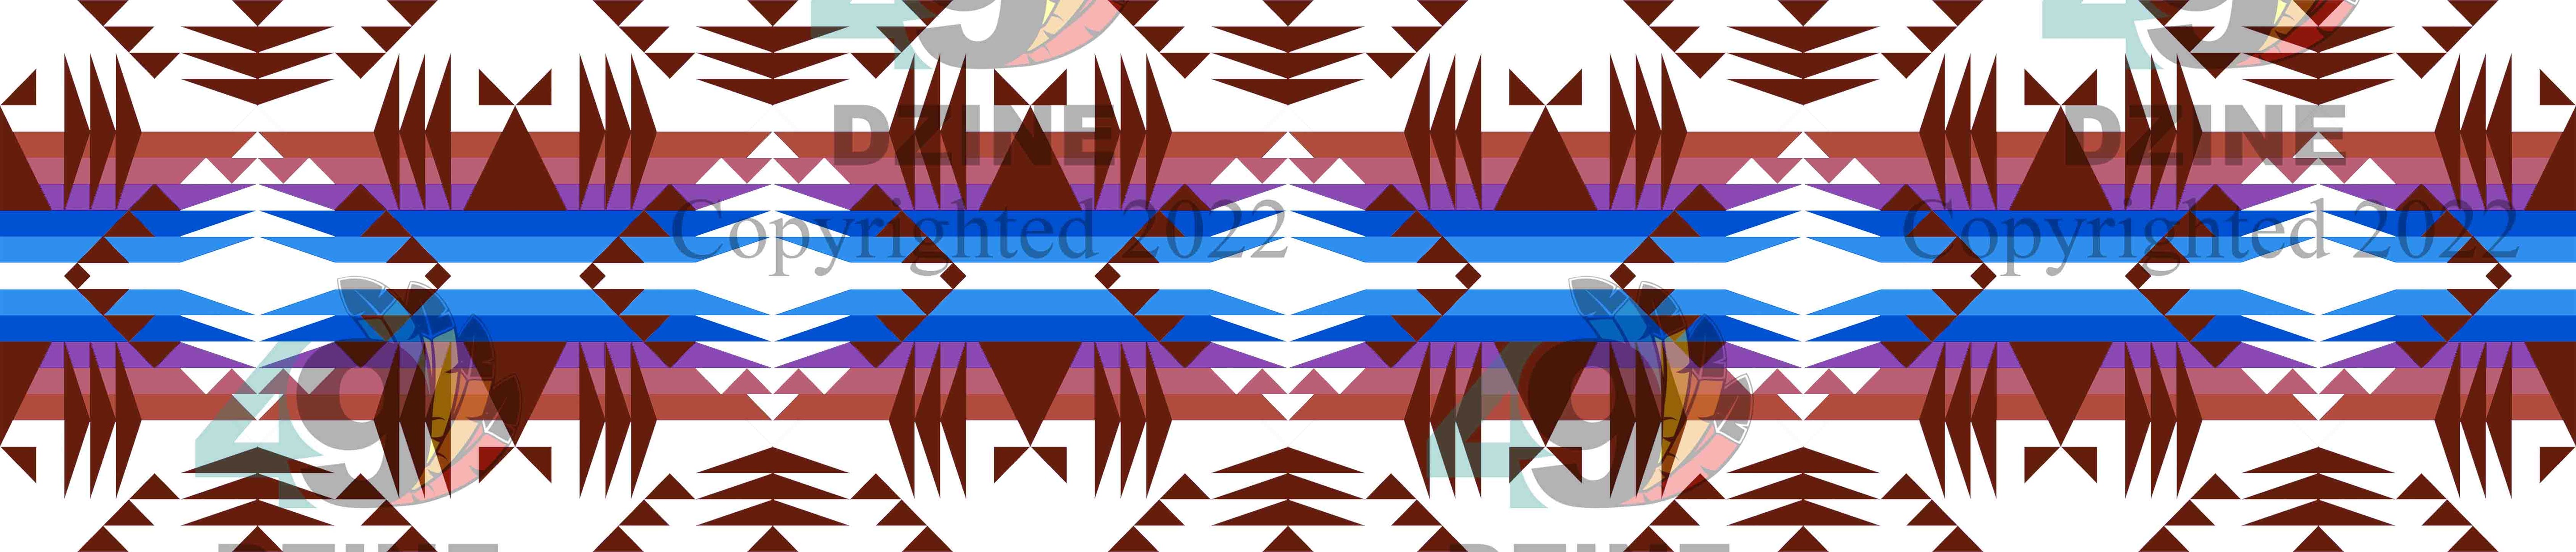 11-inch Geometric Transfer Between the Mountains Strip Transfers 49 Dzine Between the Mountains Strip Chocolate 